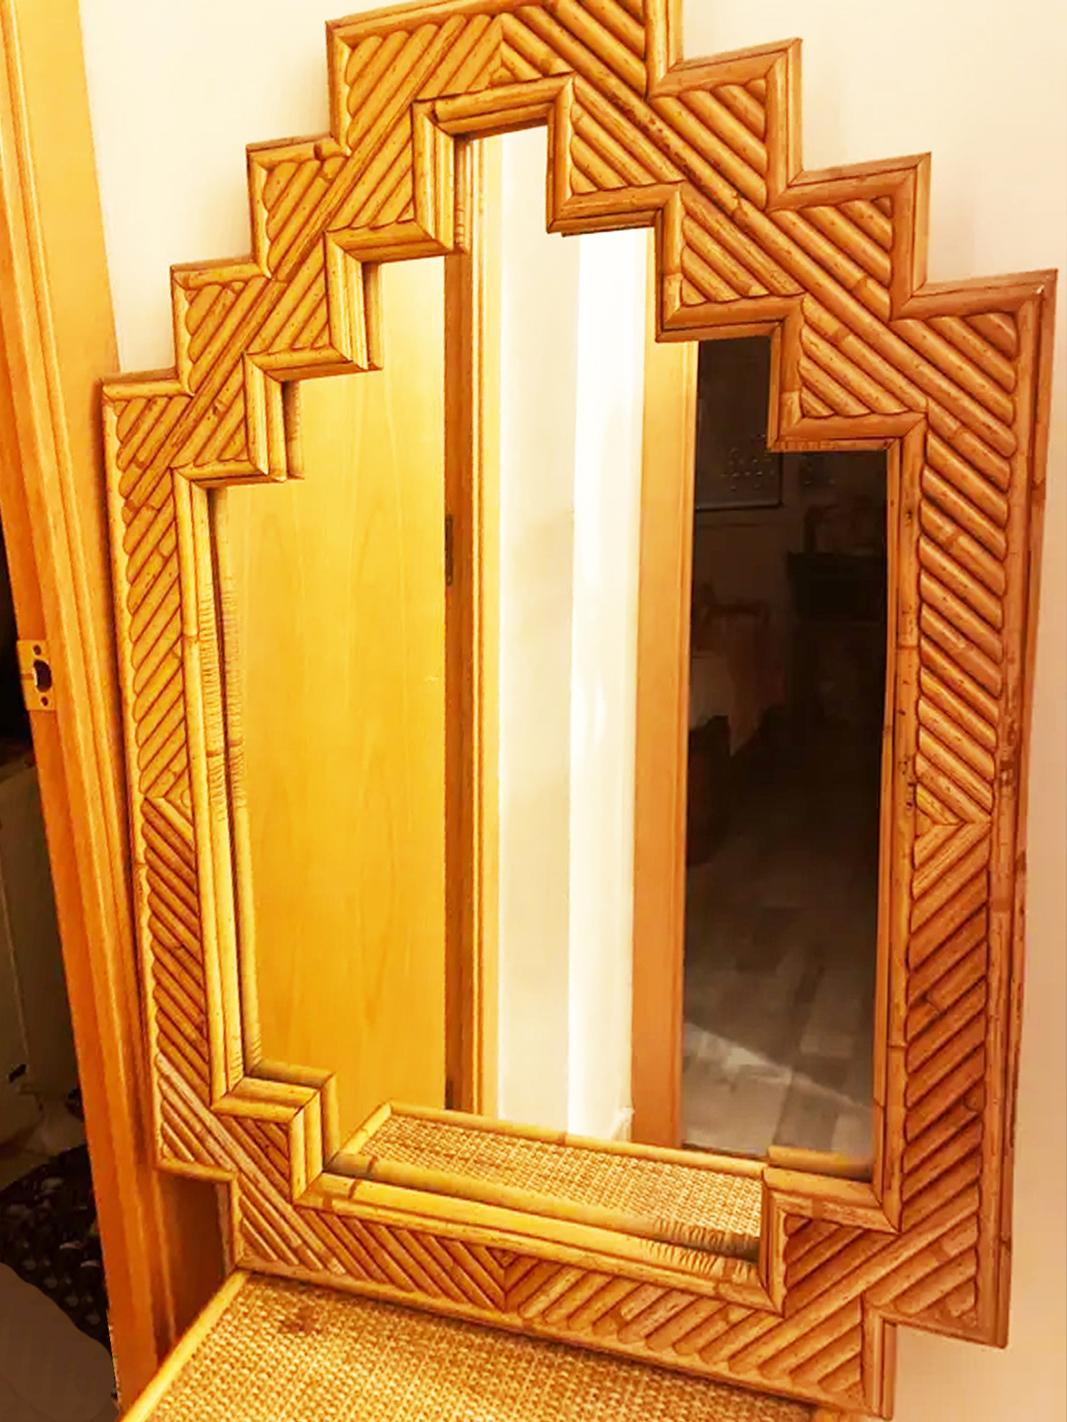 Hollywood Regency Large  Mirror Bamboo From Italy Vivai Del Sud  Style  Mid 20th Century For Sale